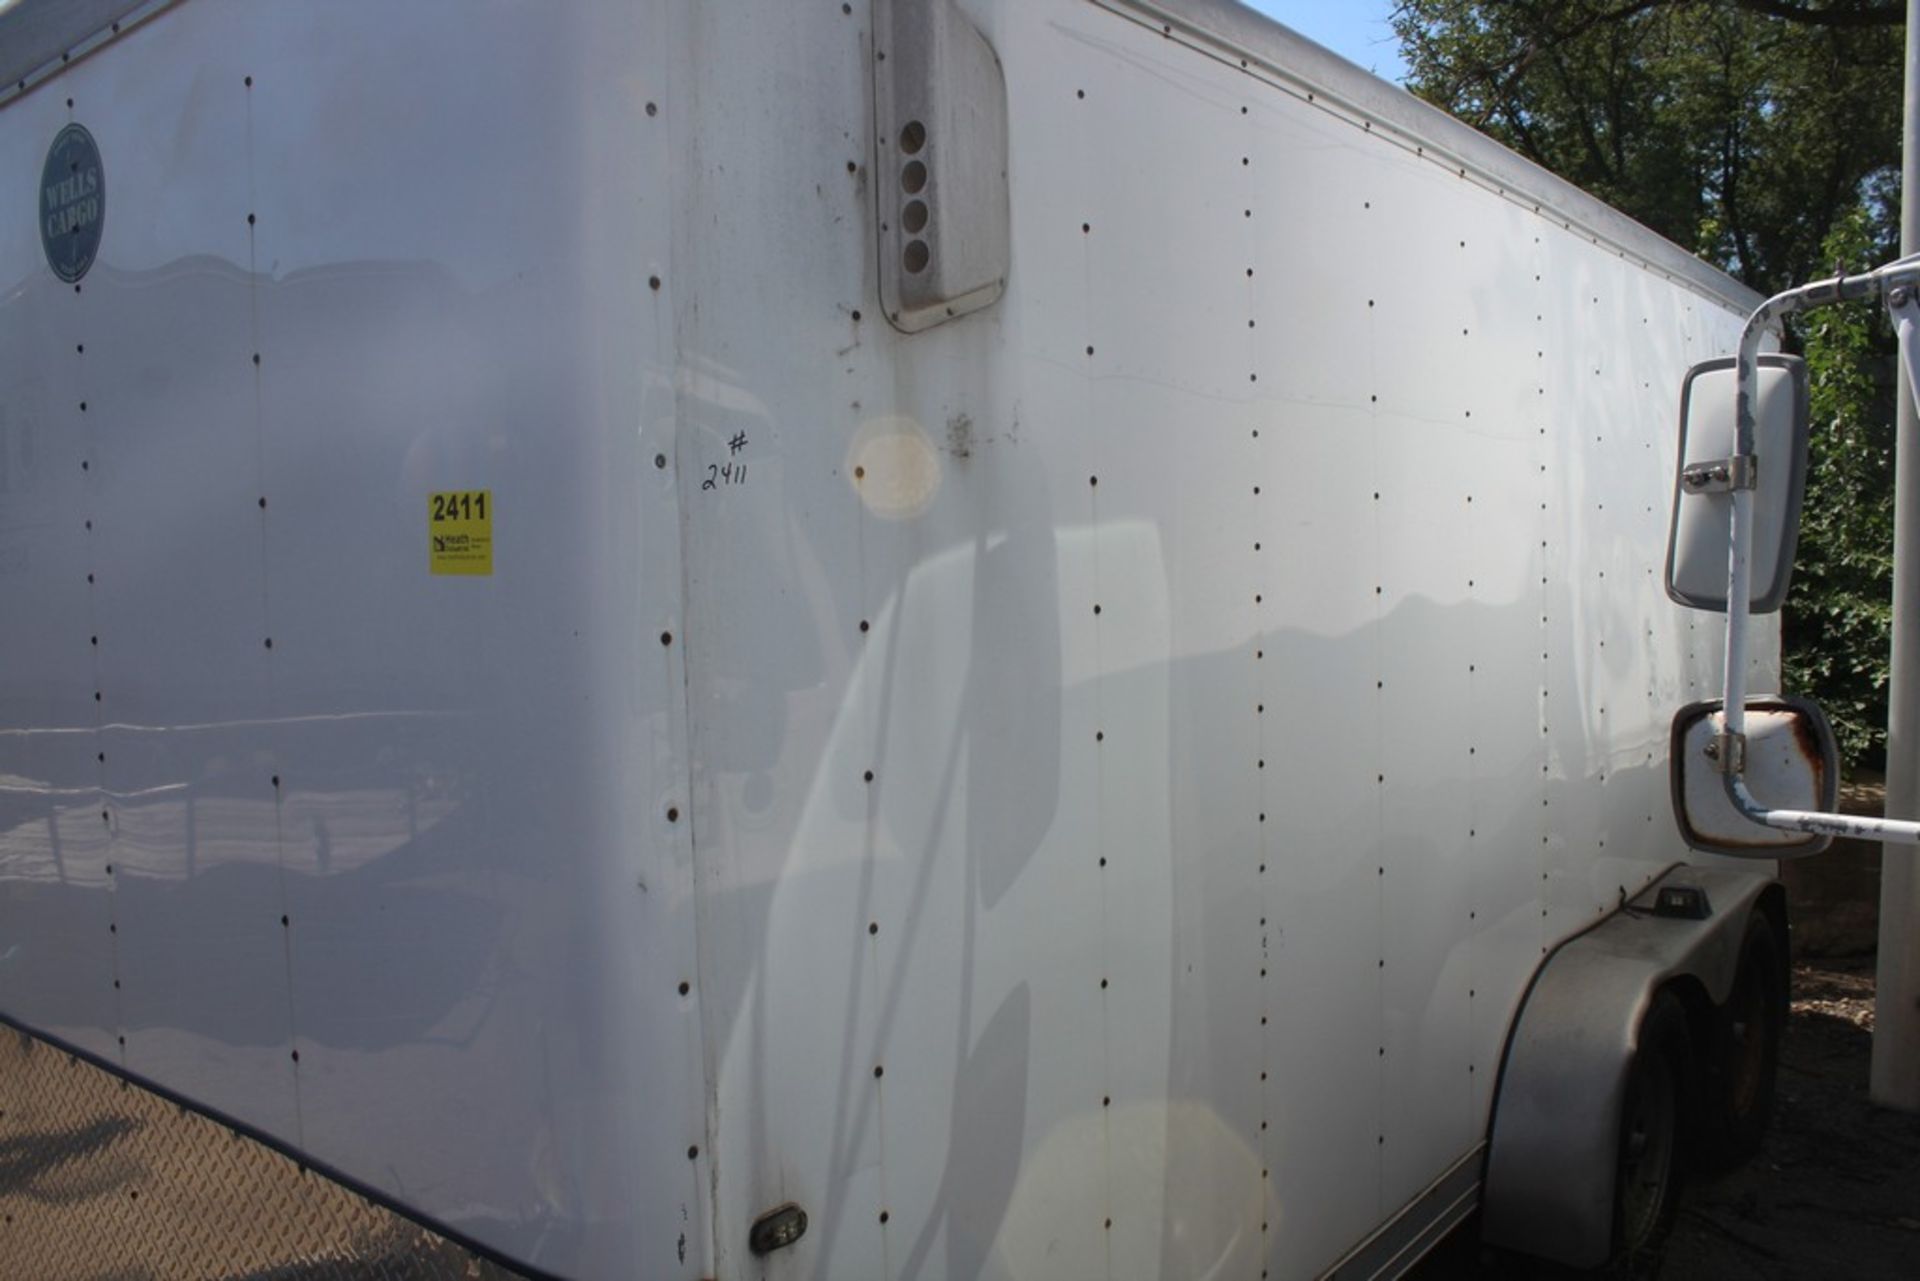 2011 Wells Cargo 16’ Model CW1622-102 Enclosed Trailer, VIN: 1WC200G2BB1185120, Tandem Axle, Rear - Image 2 of 2